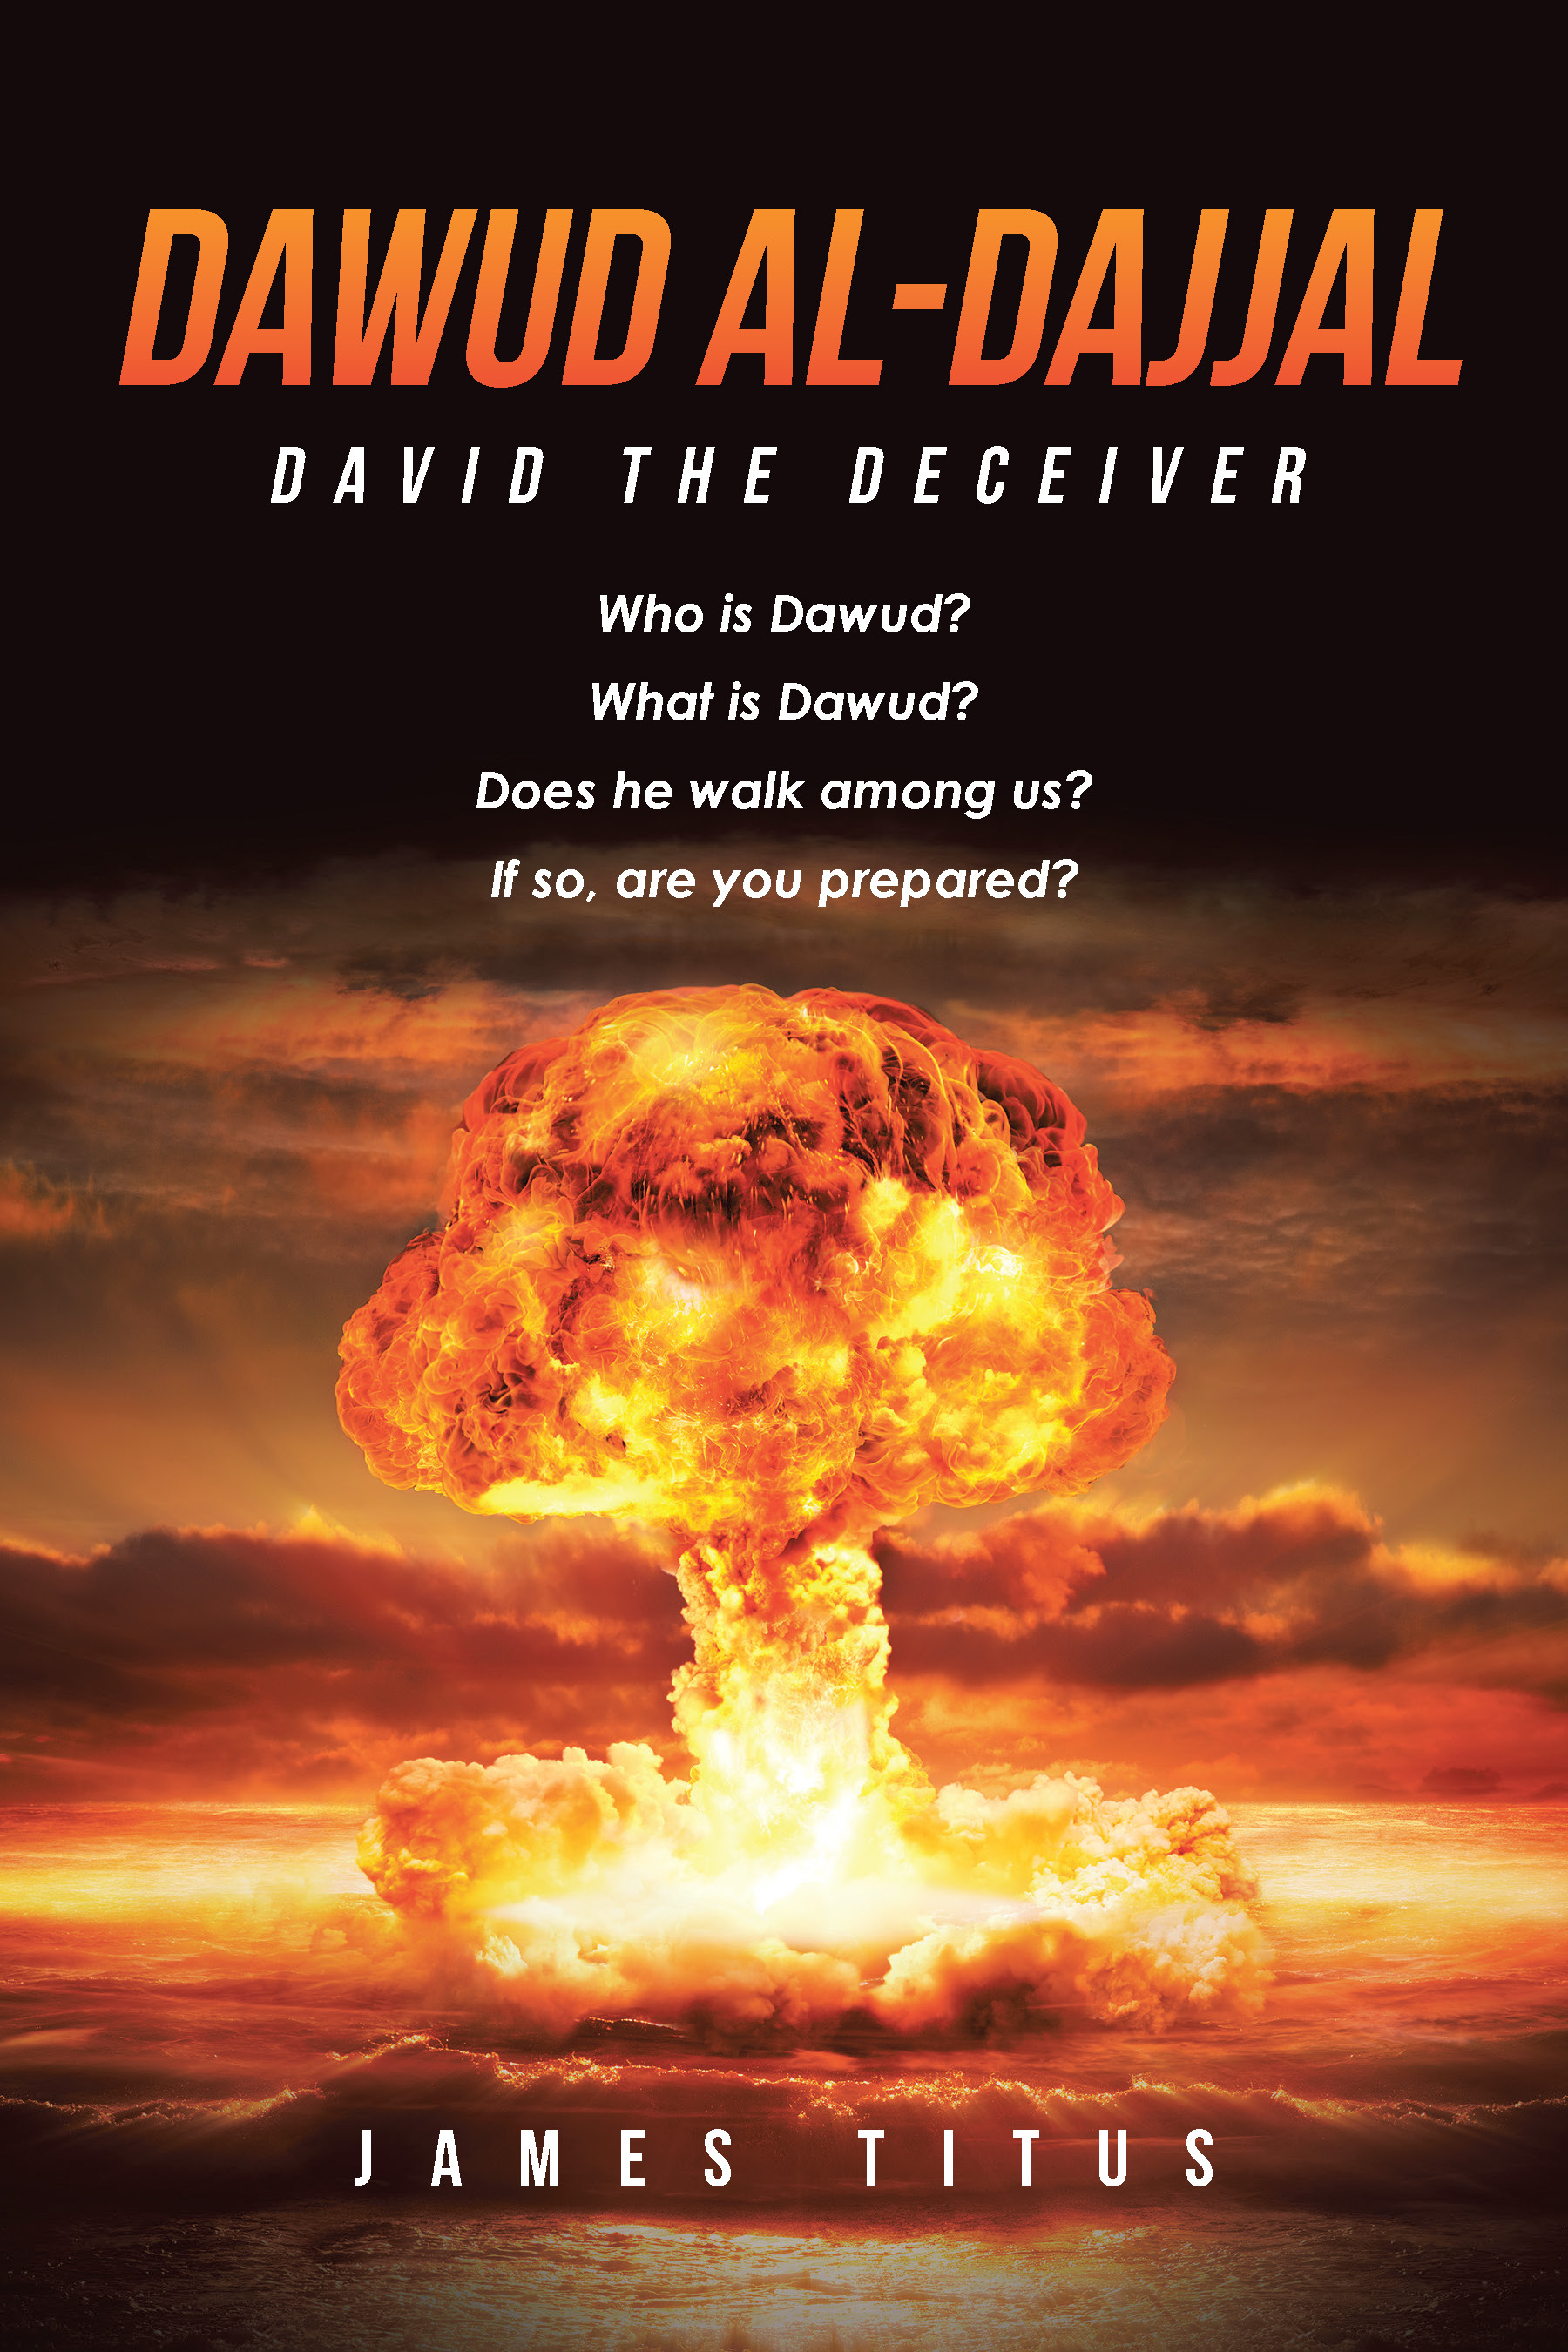 Author James Titus’s New Book, "Dawud Al-Dajjal: David The Deceiver," Explores the Global Consequences of One Man’s Growing Movement for a One-World Government Order